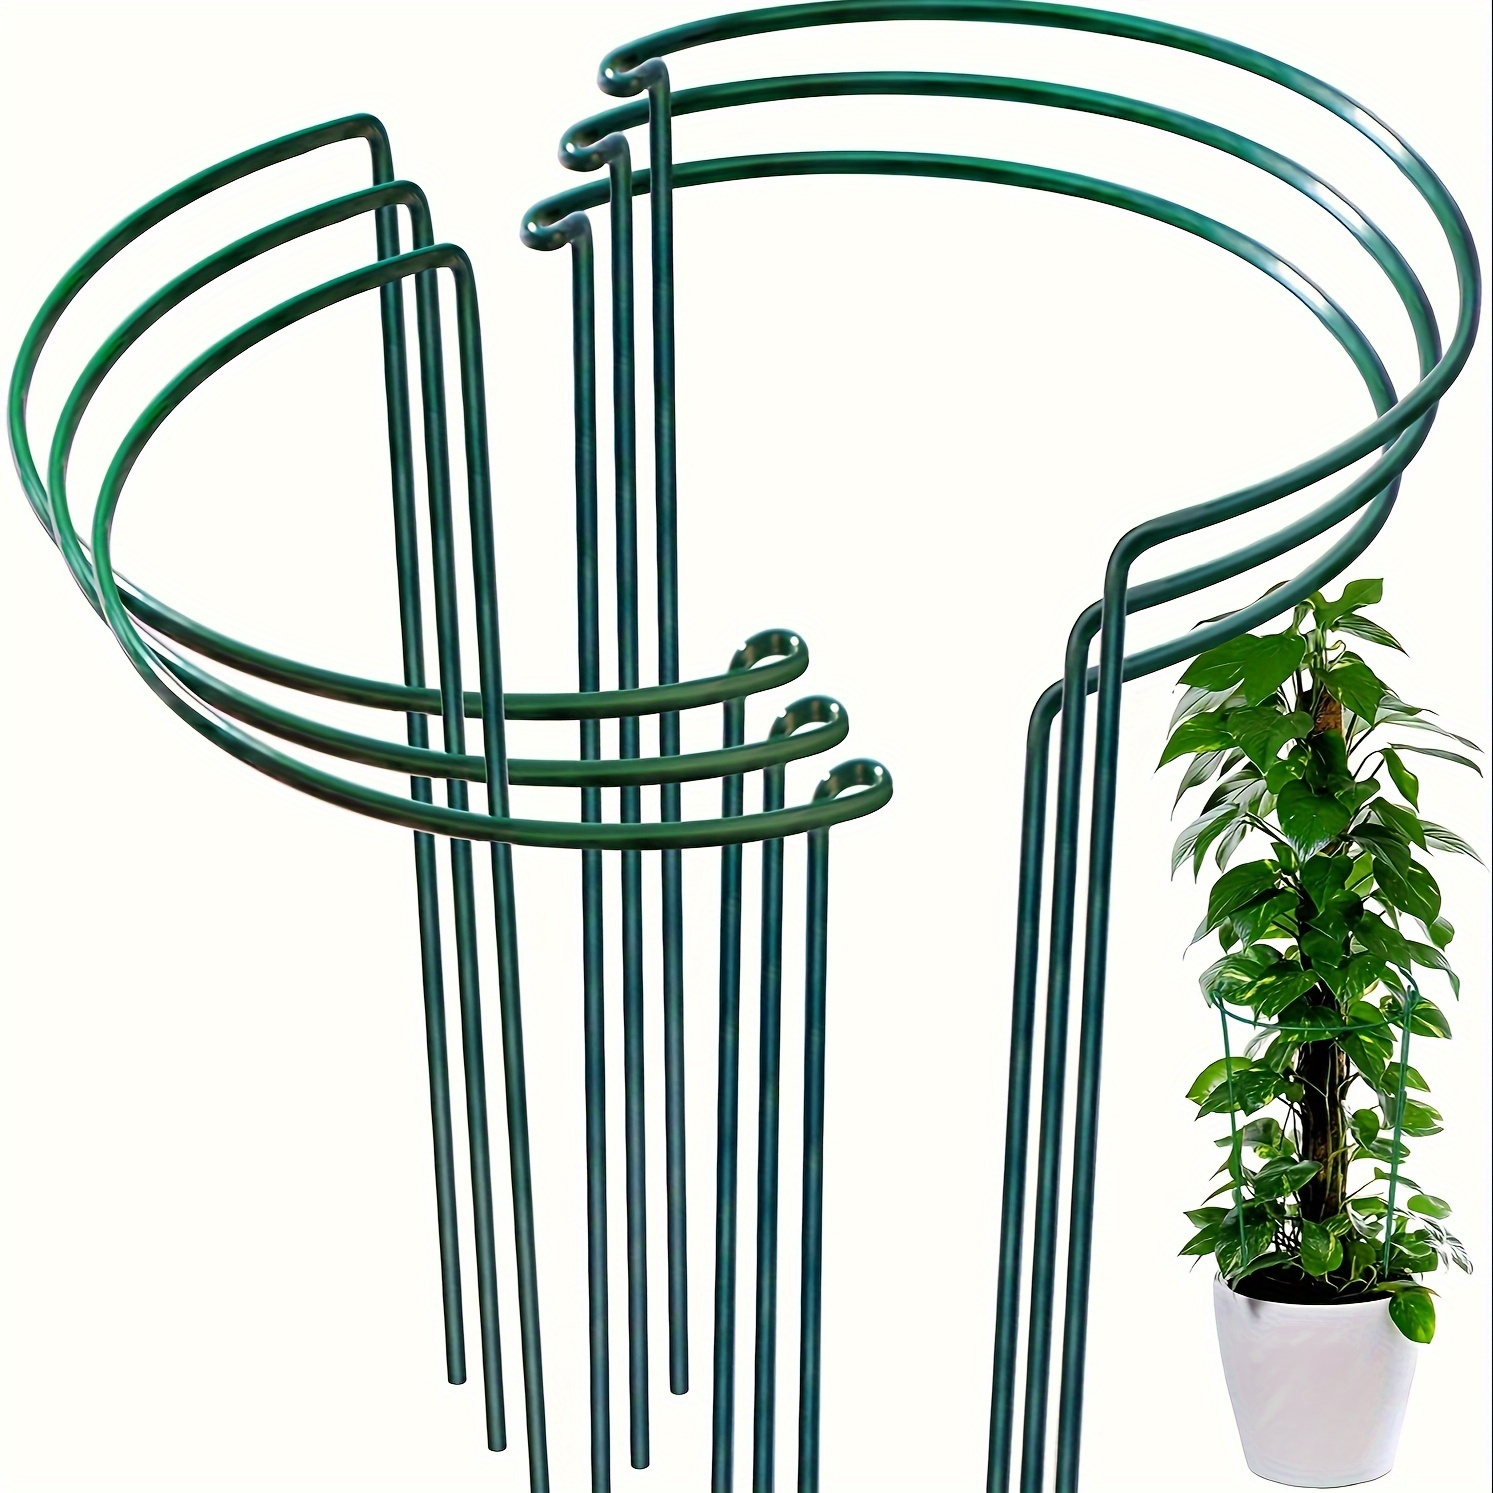 

Metal Plant Support Frame - Garden Trellis For Climbing Plants, Greenhouse Frame With Round And Circle Options, Durable Outdoor Plant Support Structure For Potted Plants And Vegetables